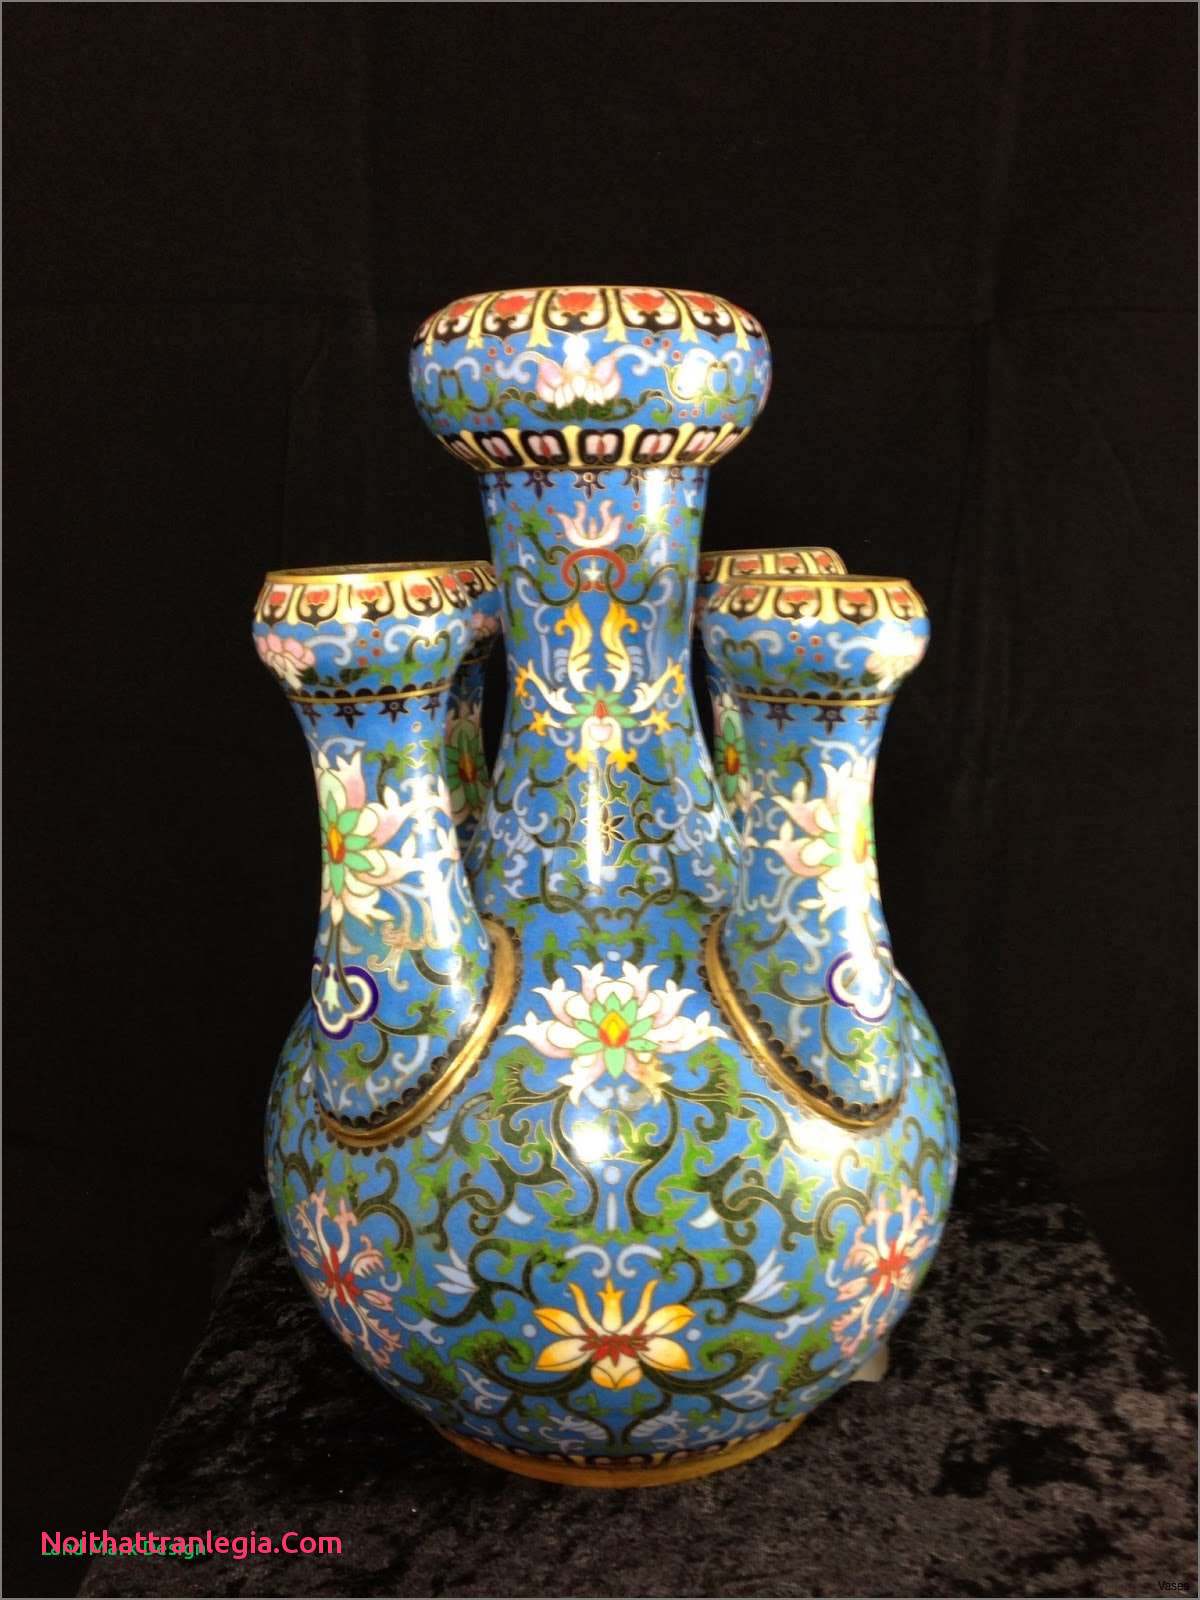 17 Lovable Chinese Cloisonne Vase Marks 2024 free download chinese cloisonne vase marks of 20 chinese antique vase noithattranlegia vases design within 213 1h vases antique asian the increased trade of chinese ware during 16th century has significan